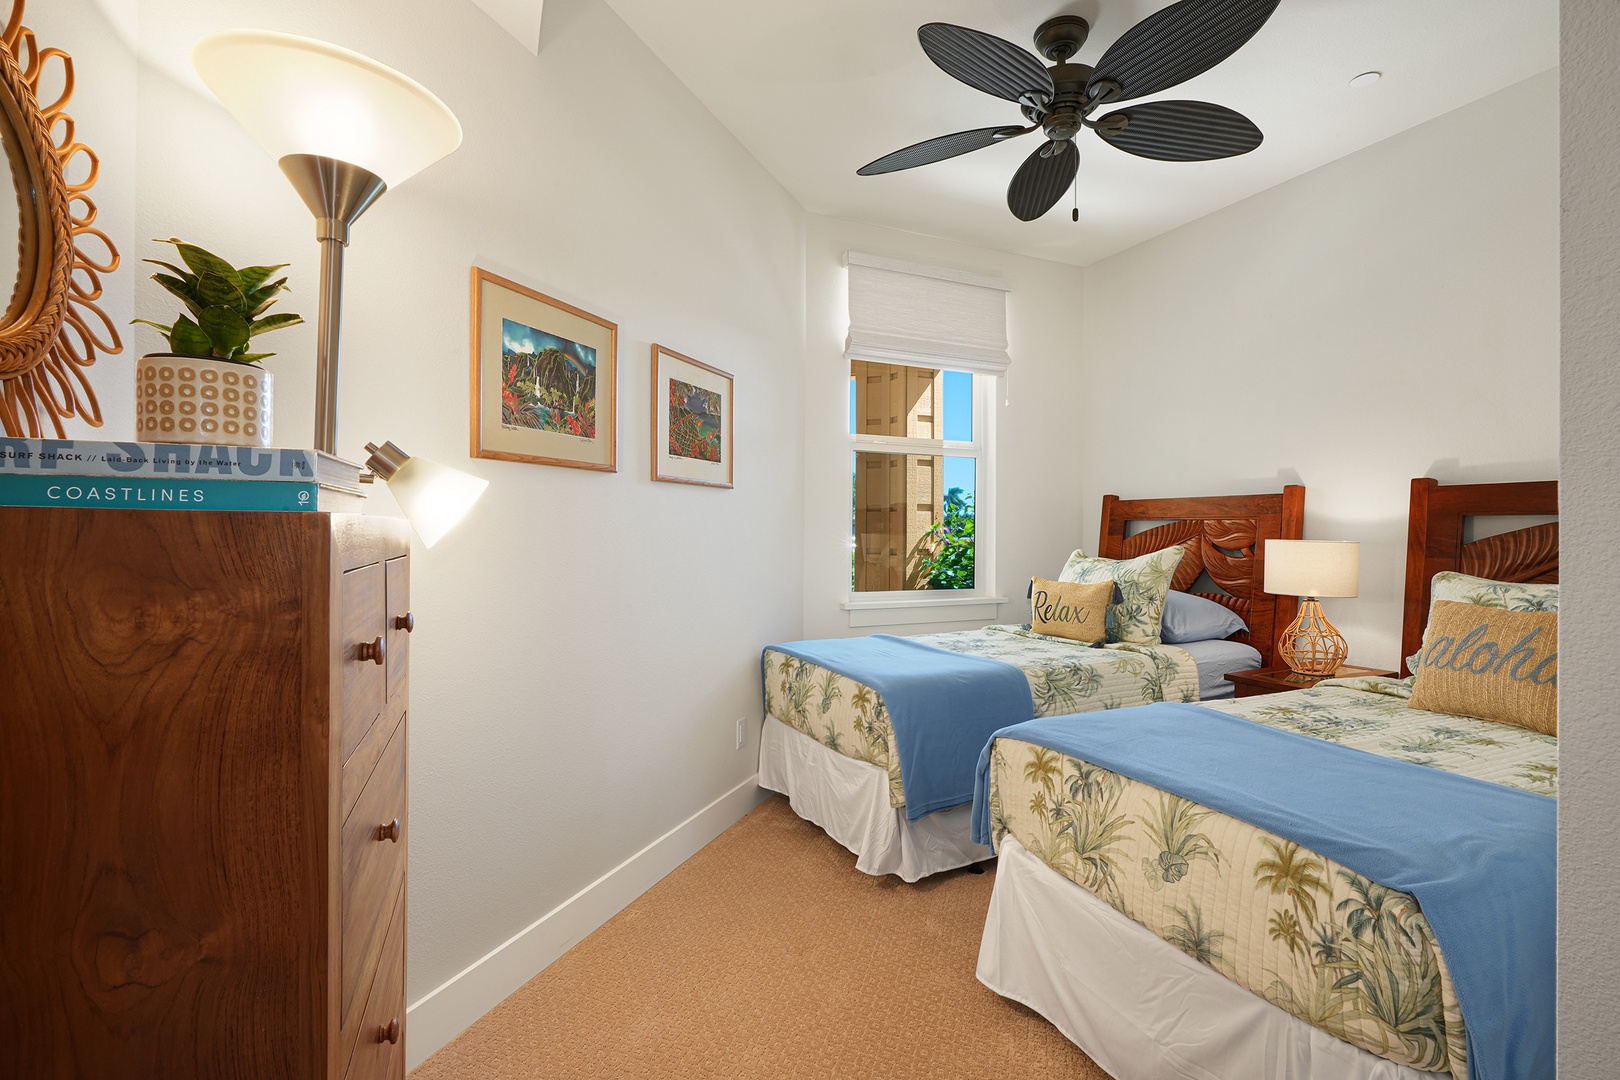 Koloa Vacation Rentals, Pili Mai 7J - Comfortable twin bedroom with soft lighting and ceiling fan.